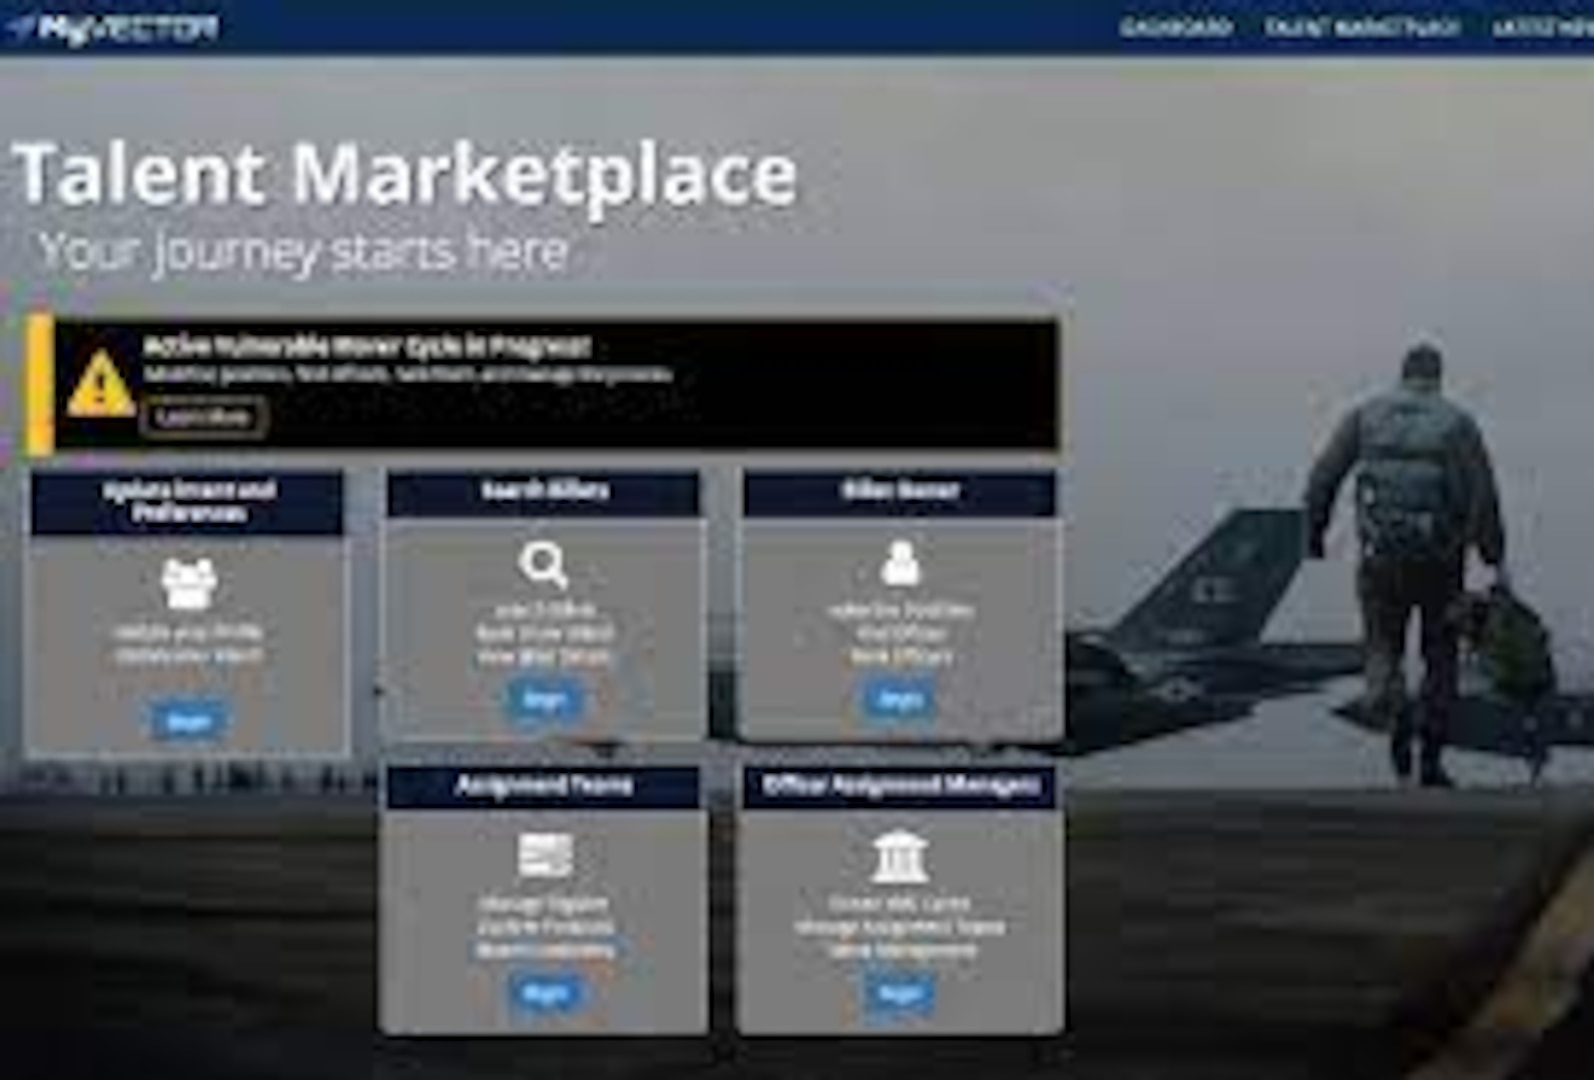 The Talent Marketplace at myVector.